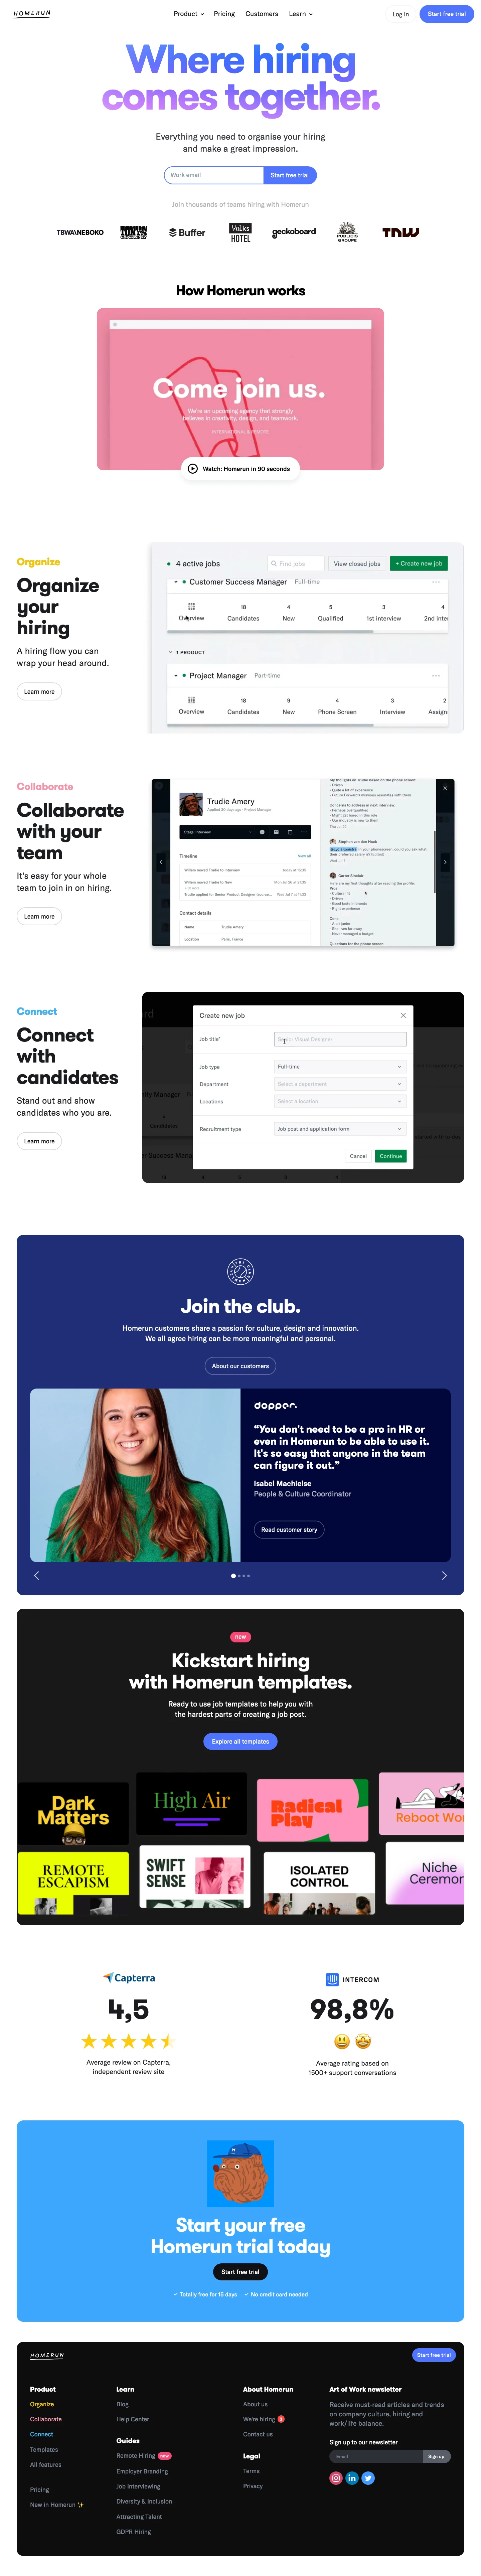 Homerun Landing Page Example: Where hiring comes together. Everything you need to organise your hiring, review together and treat candidates better.